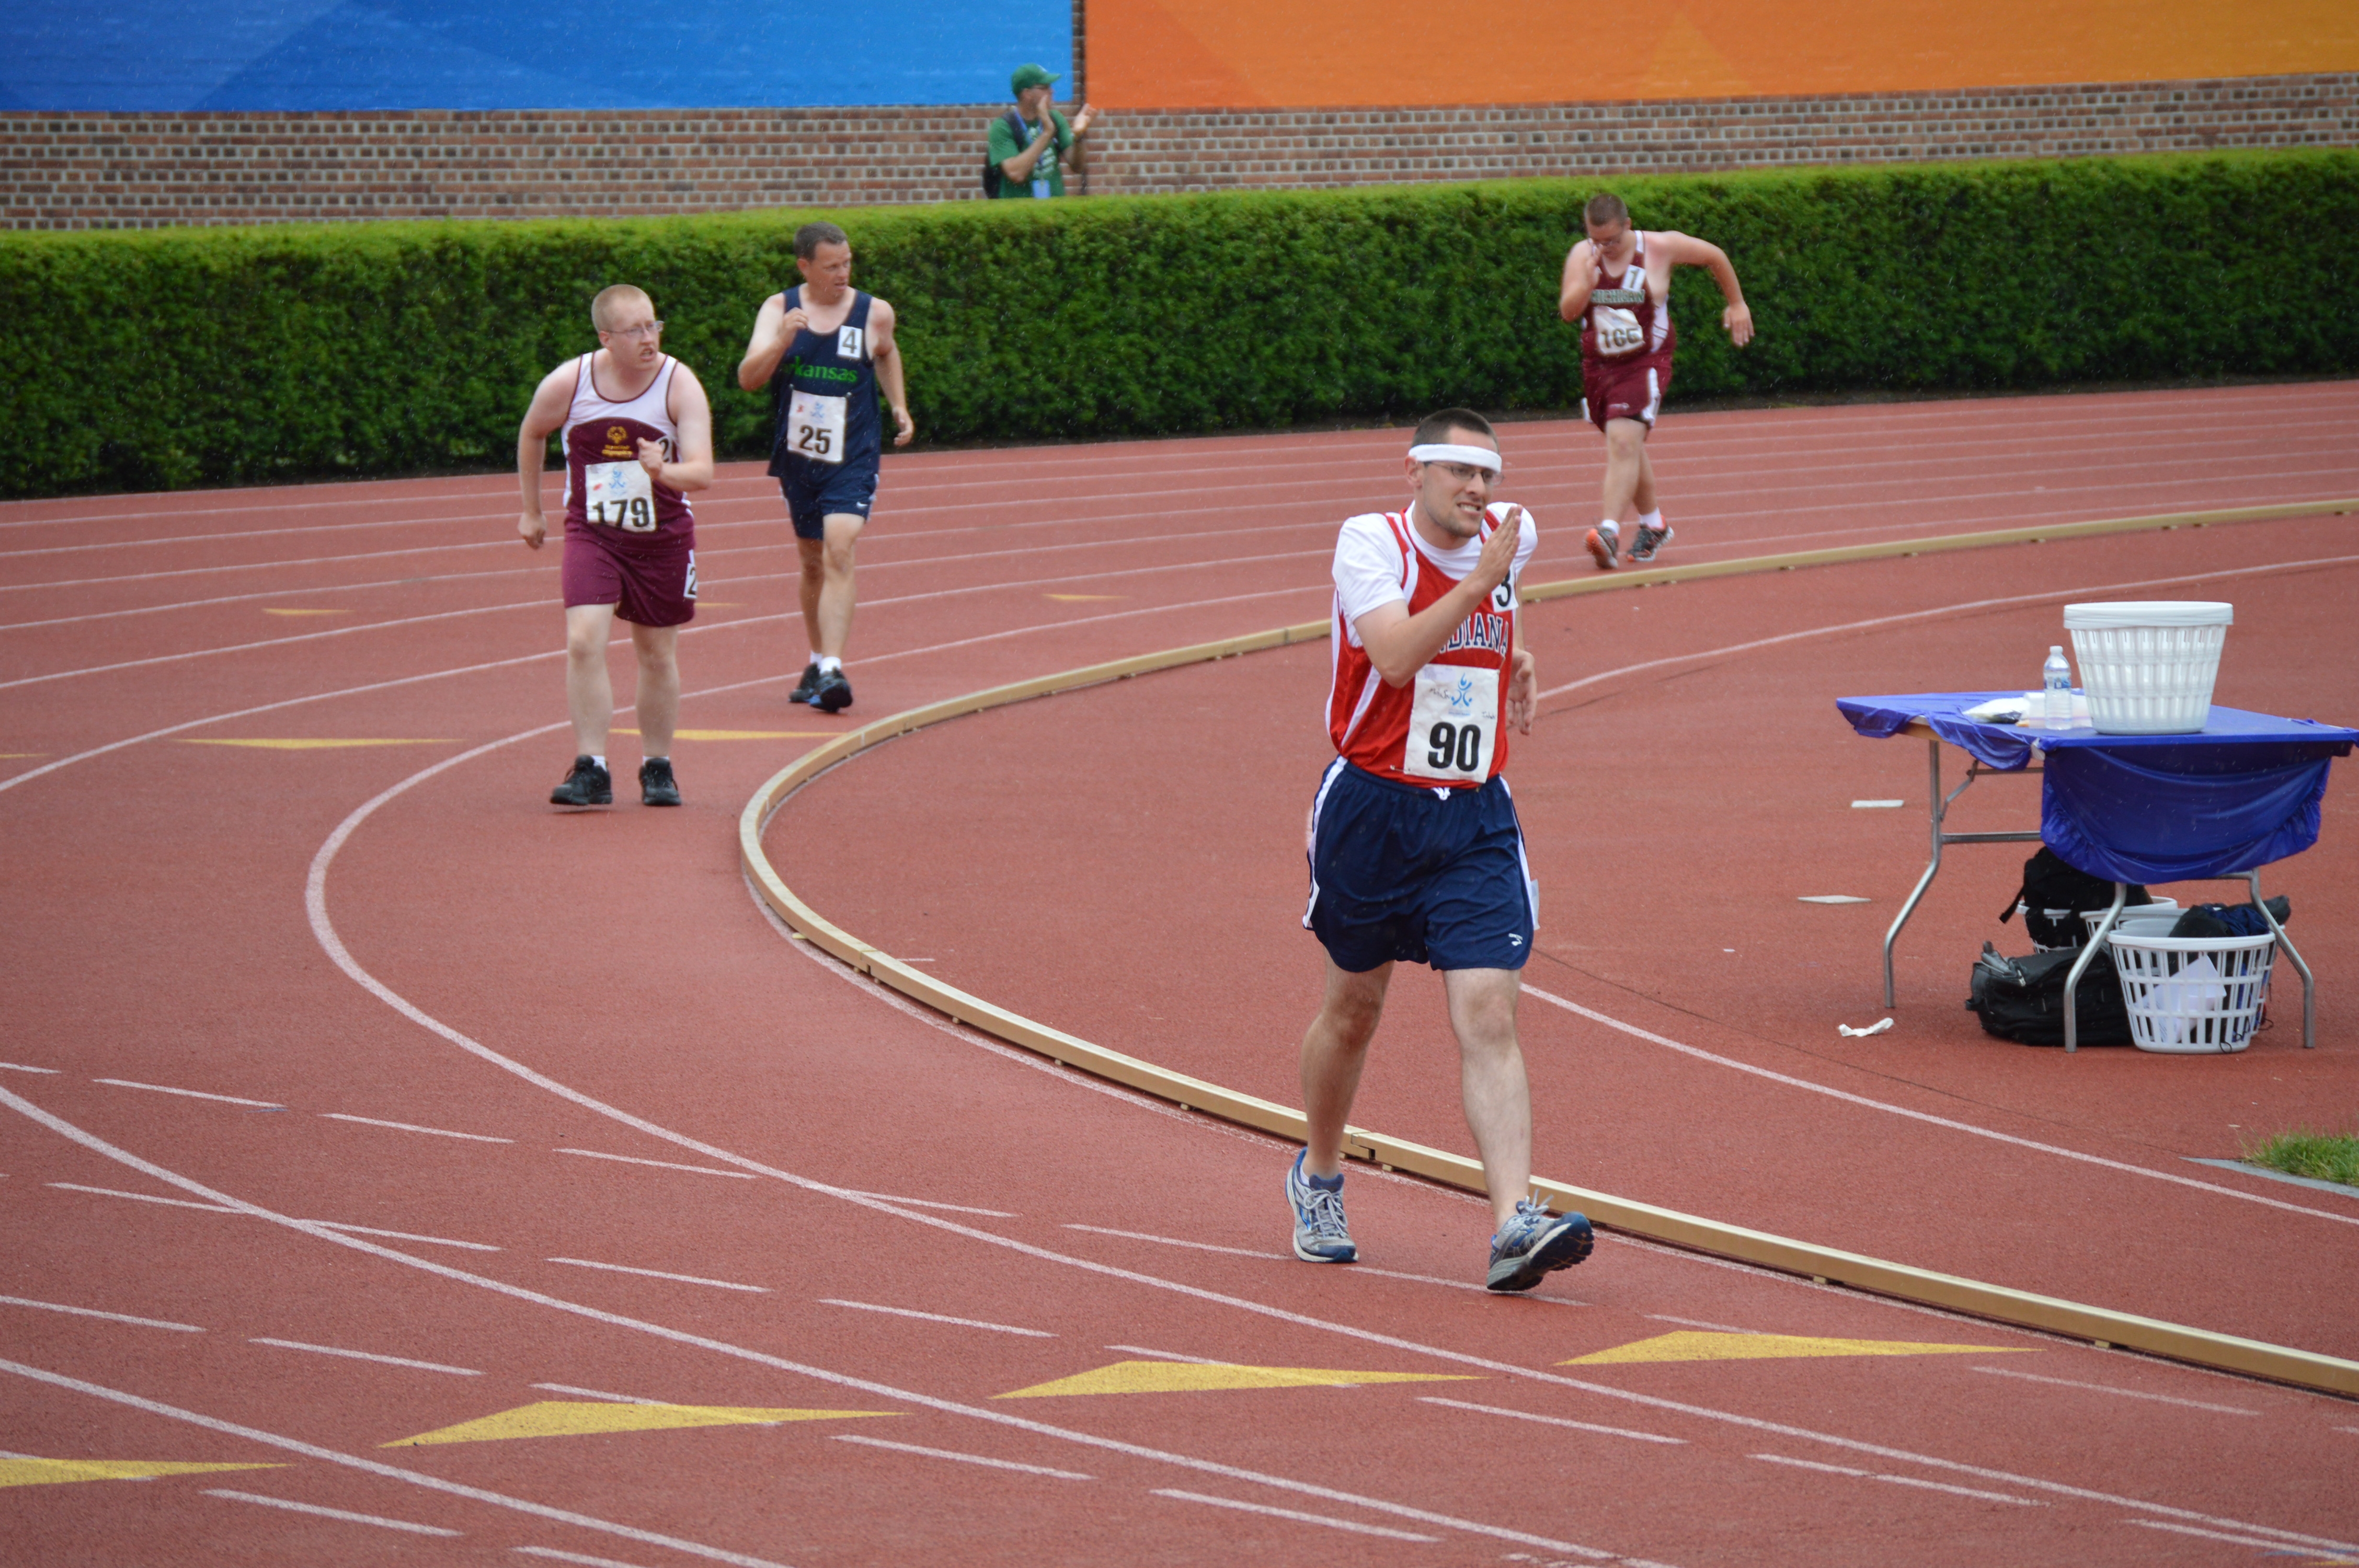 Hugh Breen runs for gold in the special olympics. (Submitted photo)